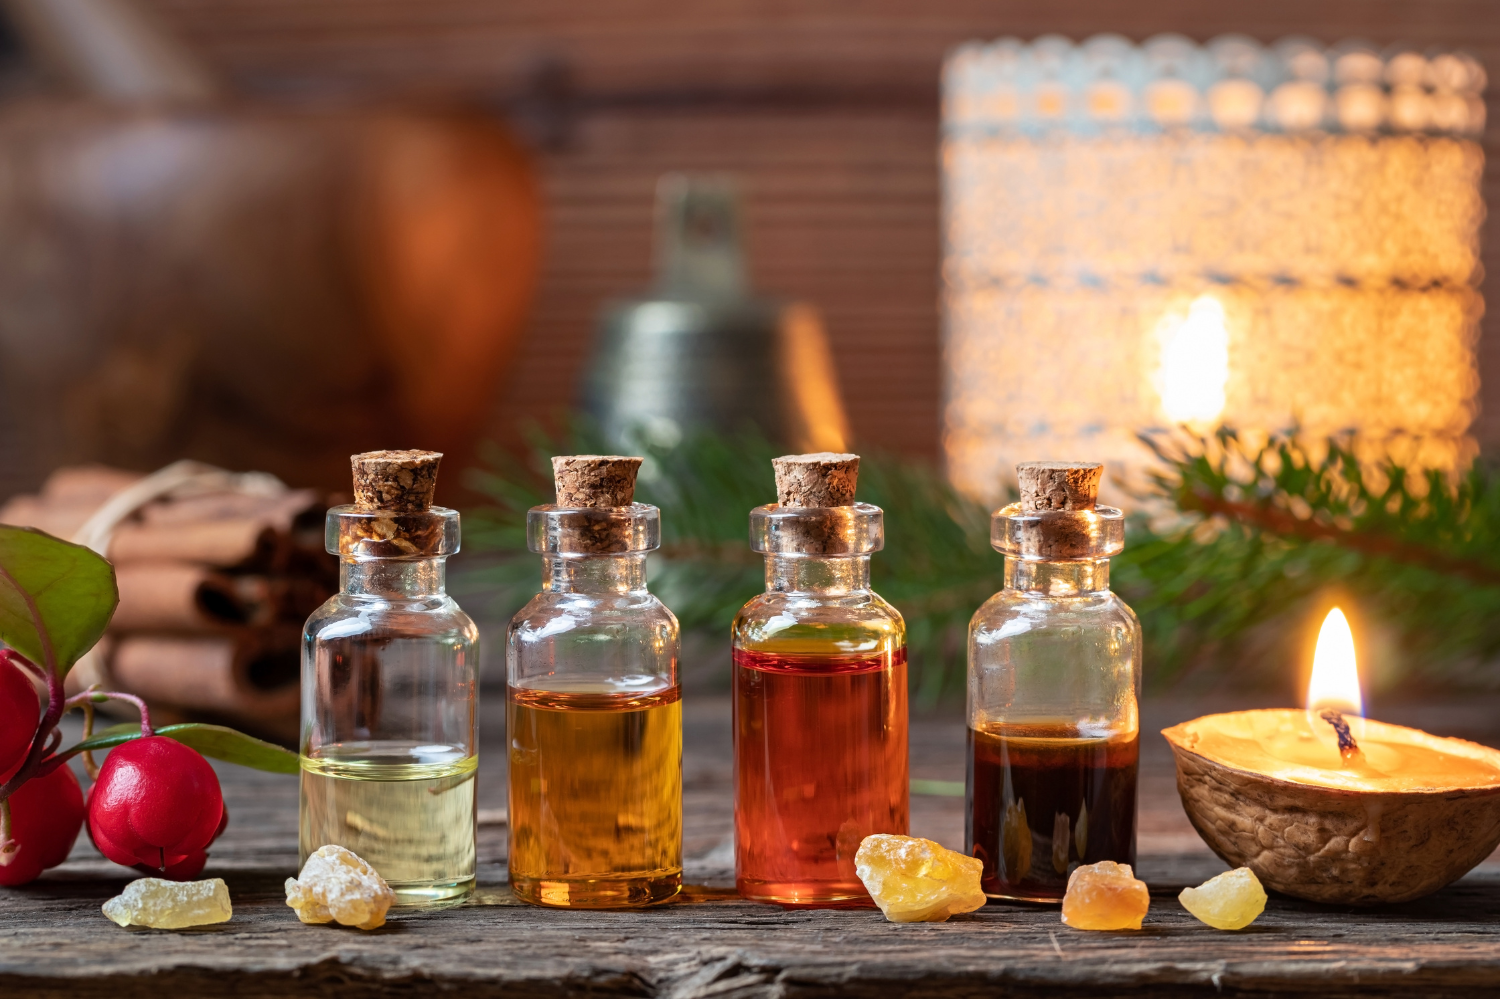 Four small glass bottles with various colored oils, a burning candle, and dried herbs on a wooden table, creating a cozy ambiance.